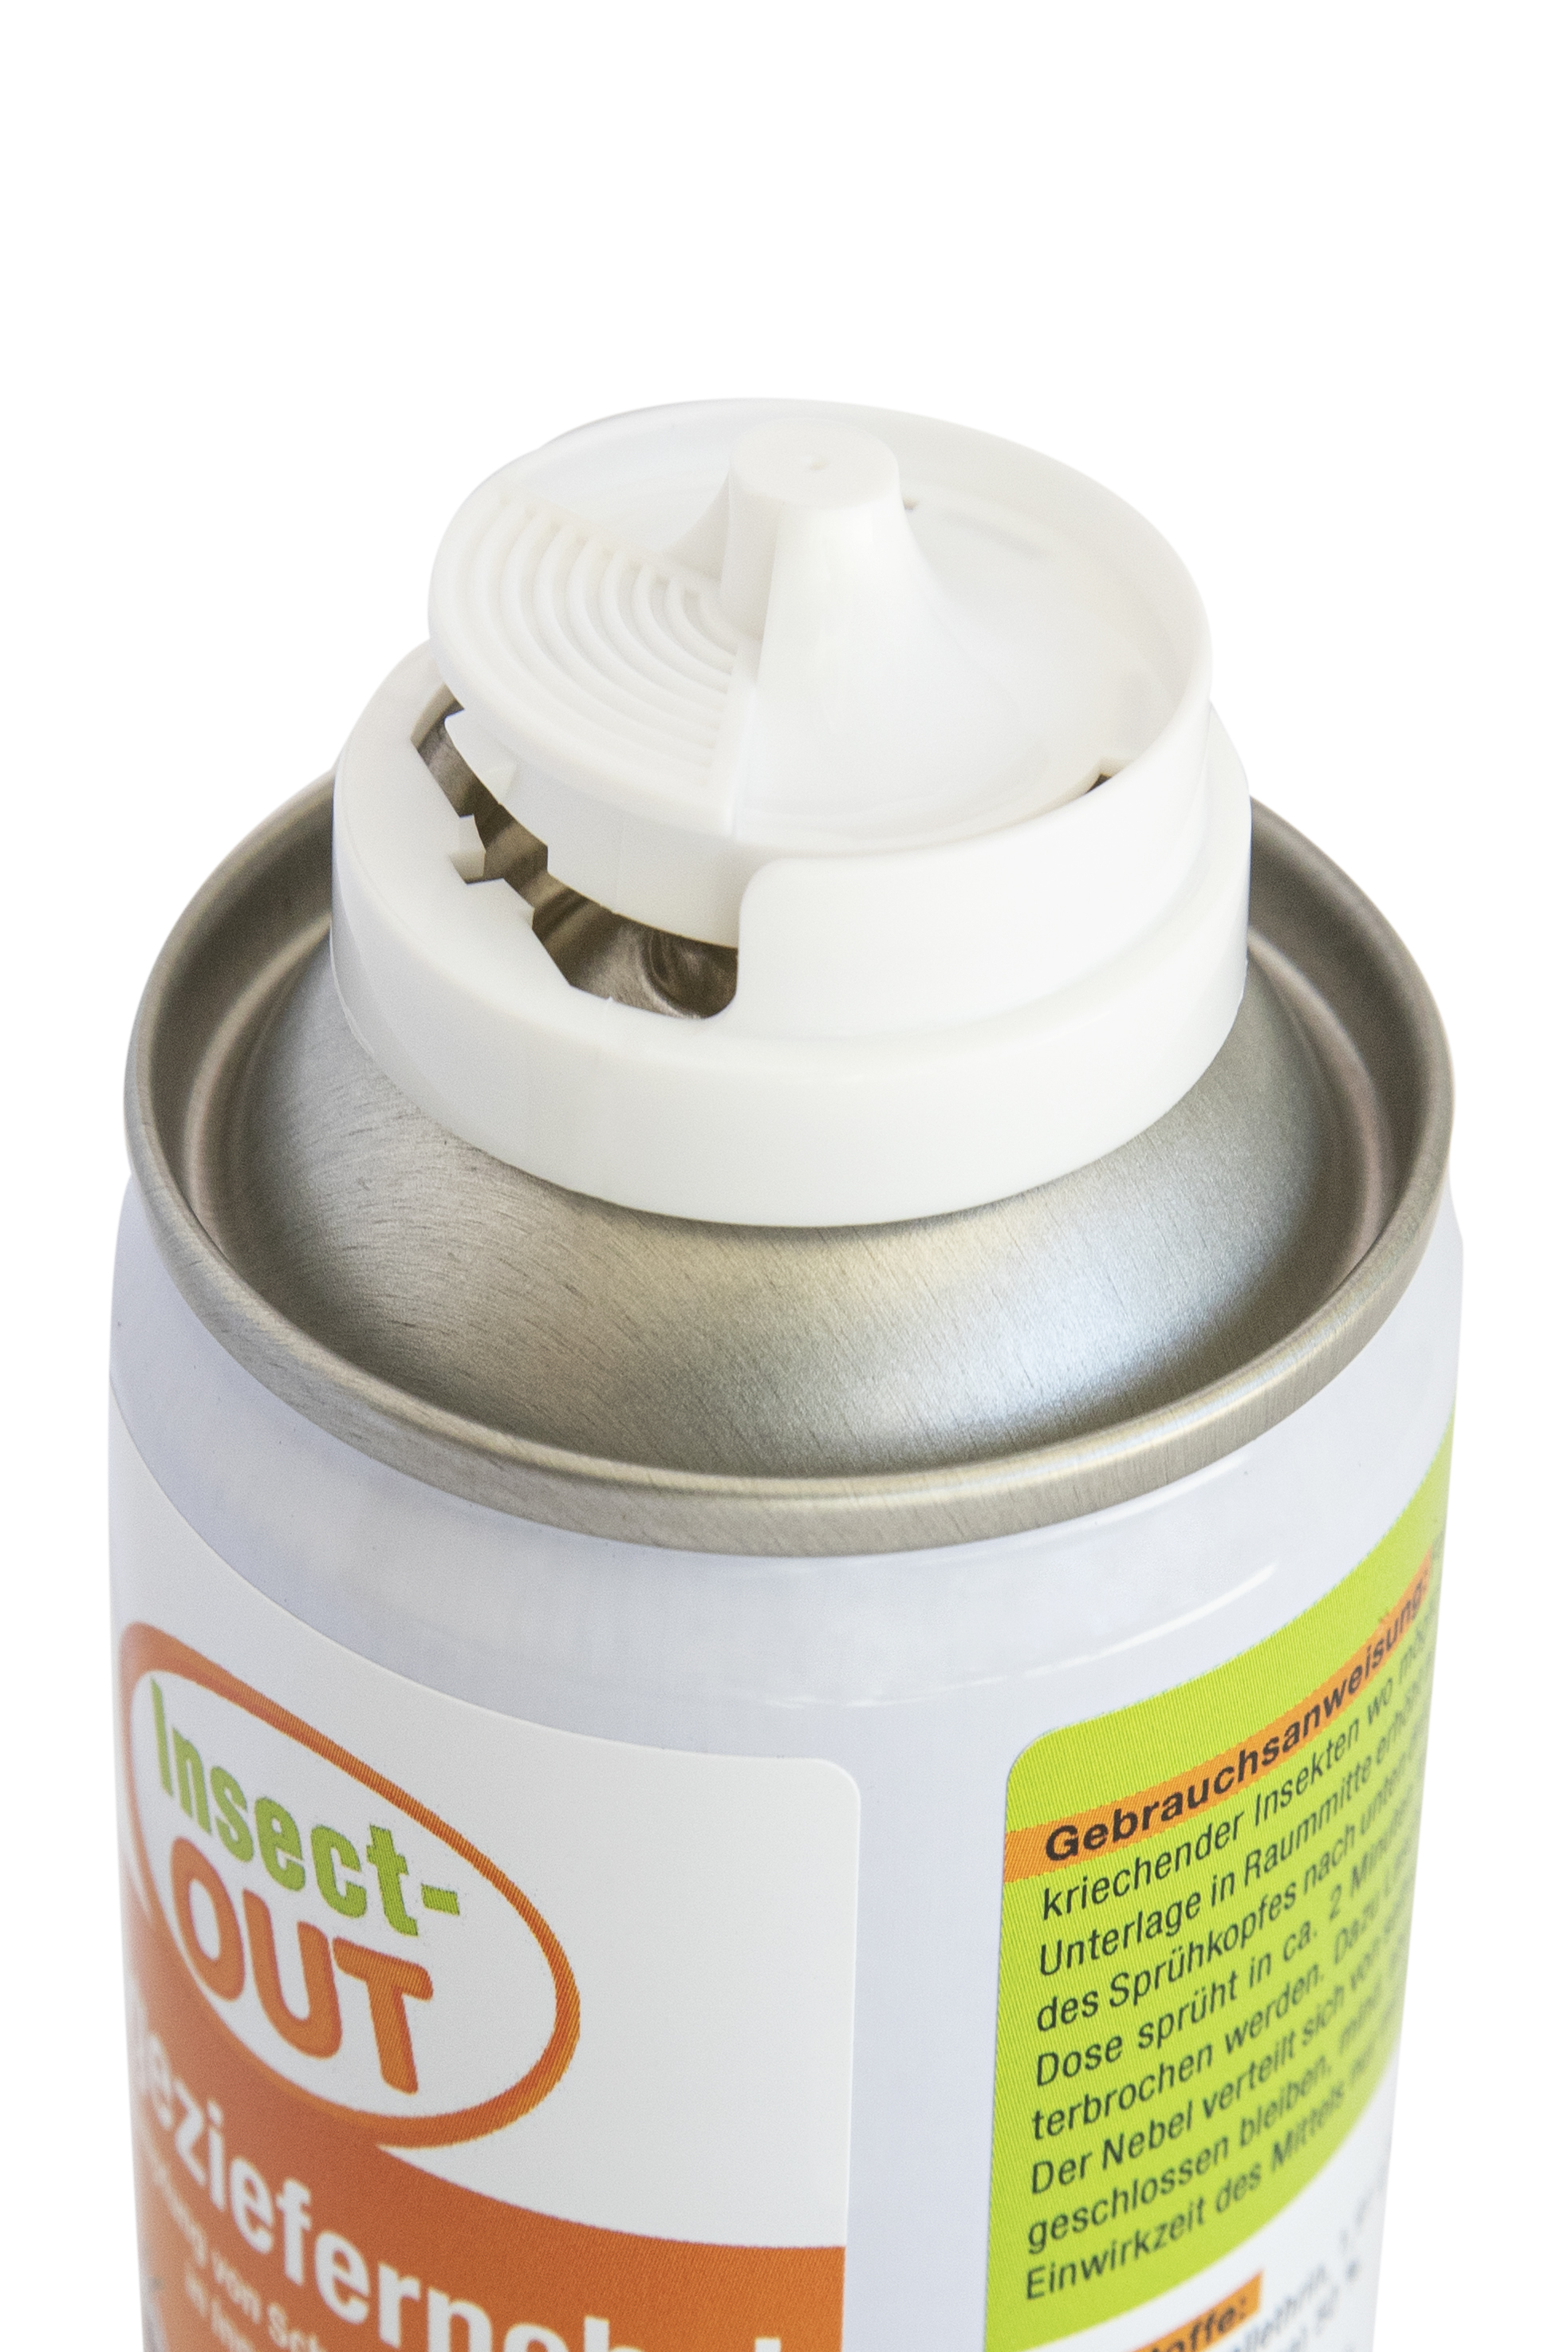 Insect-OUT Ungeziefernebel 400ml